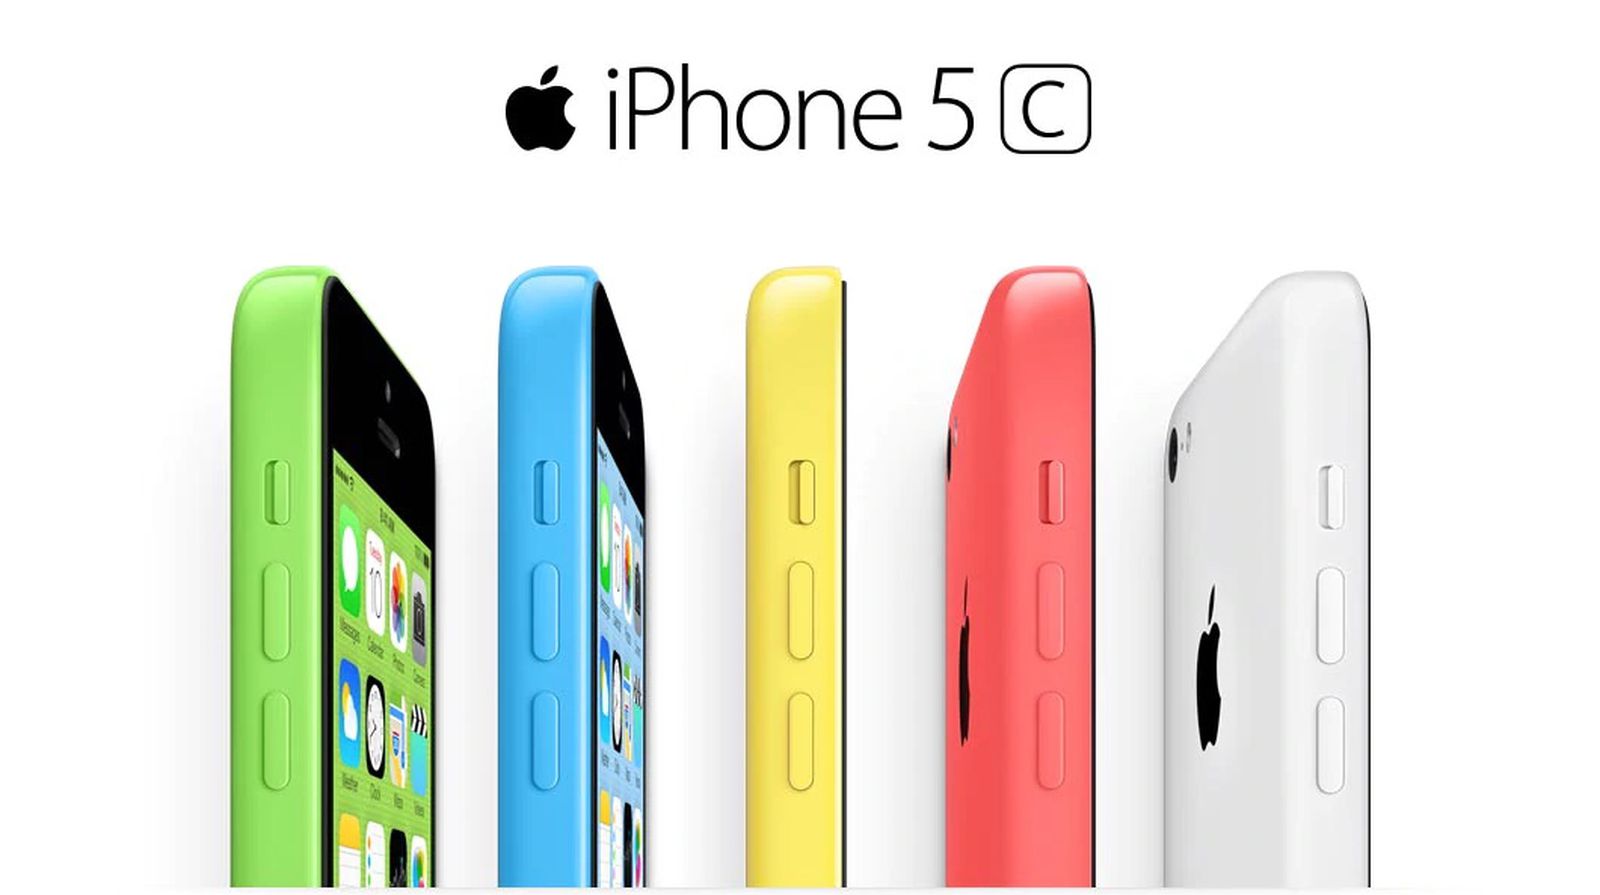 Apple to Mark iPhone 5c as Obsolete Next Month - MacRumors